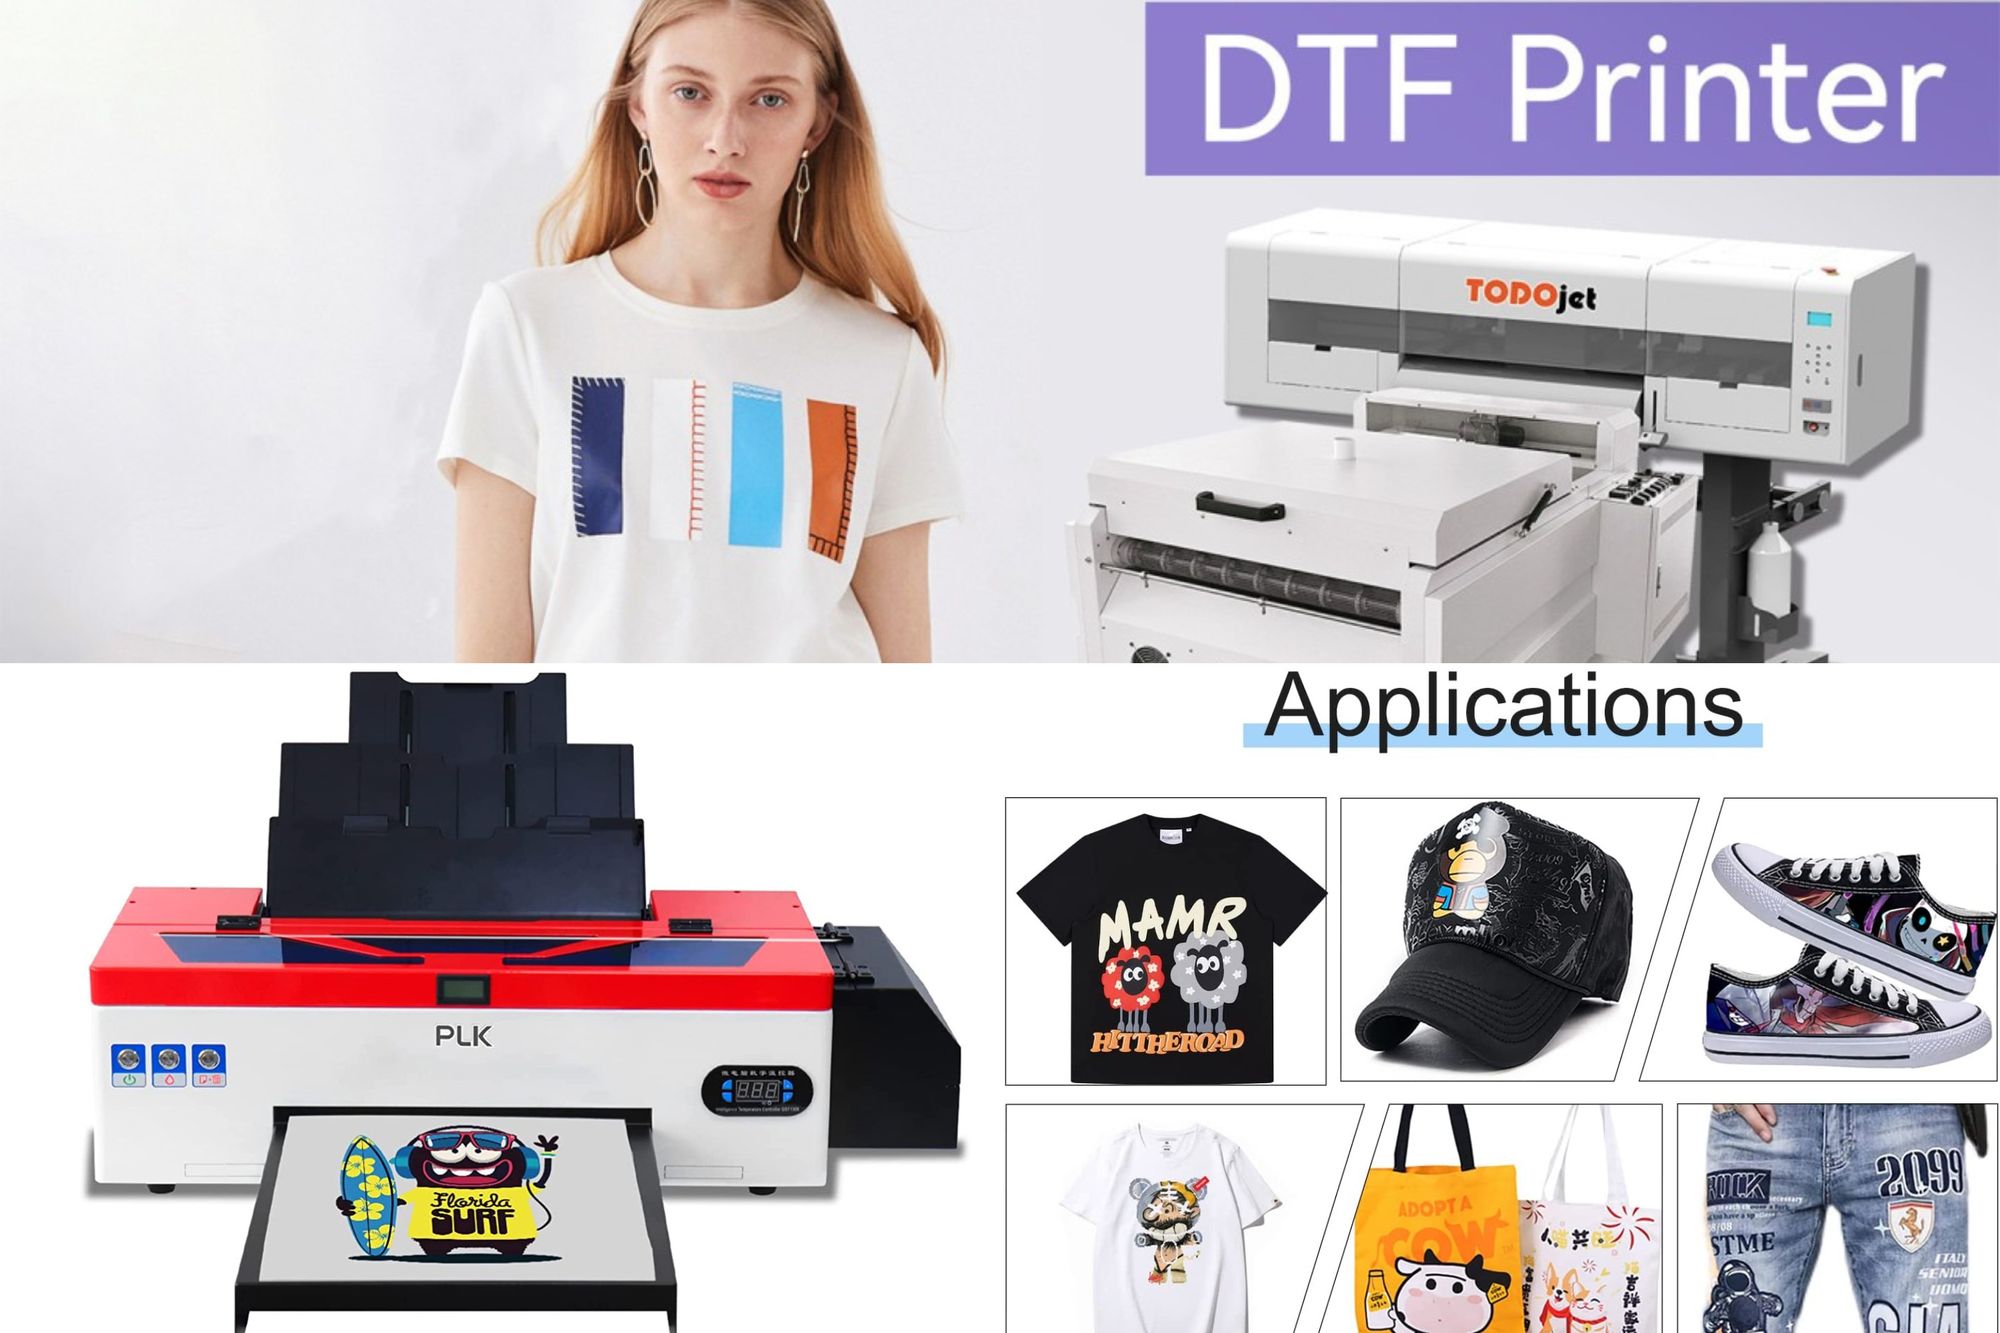 DTF PRINTERS 101 - Which Printer is Right for Your Needs?